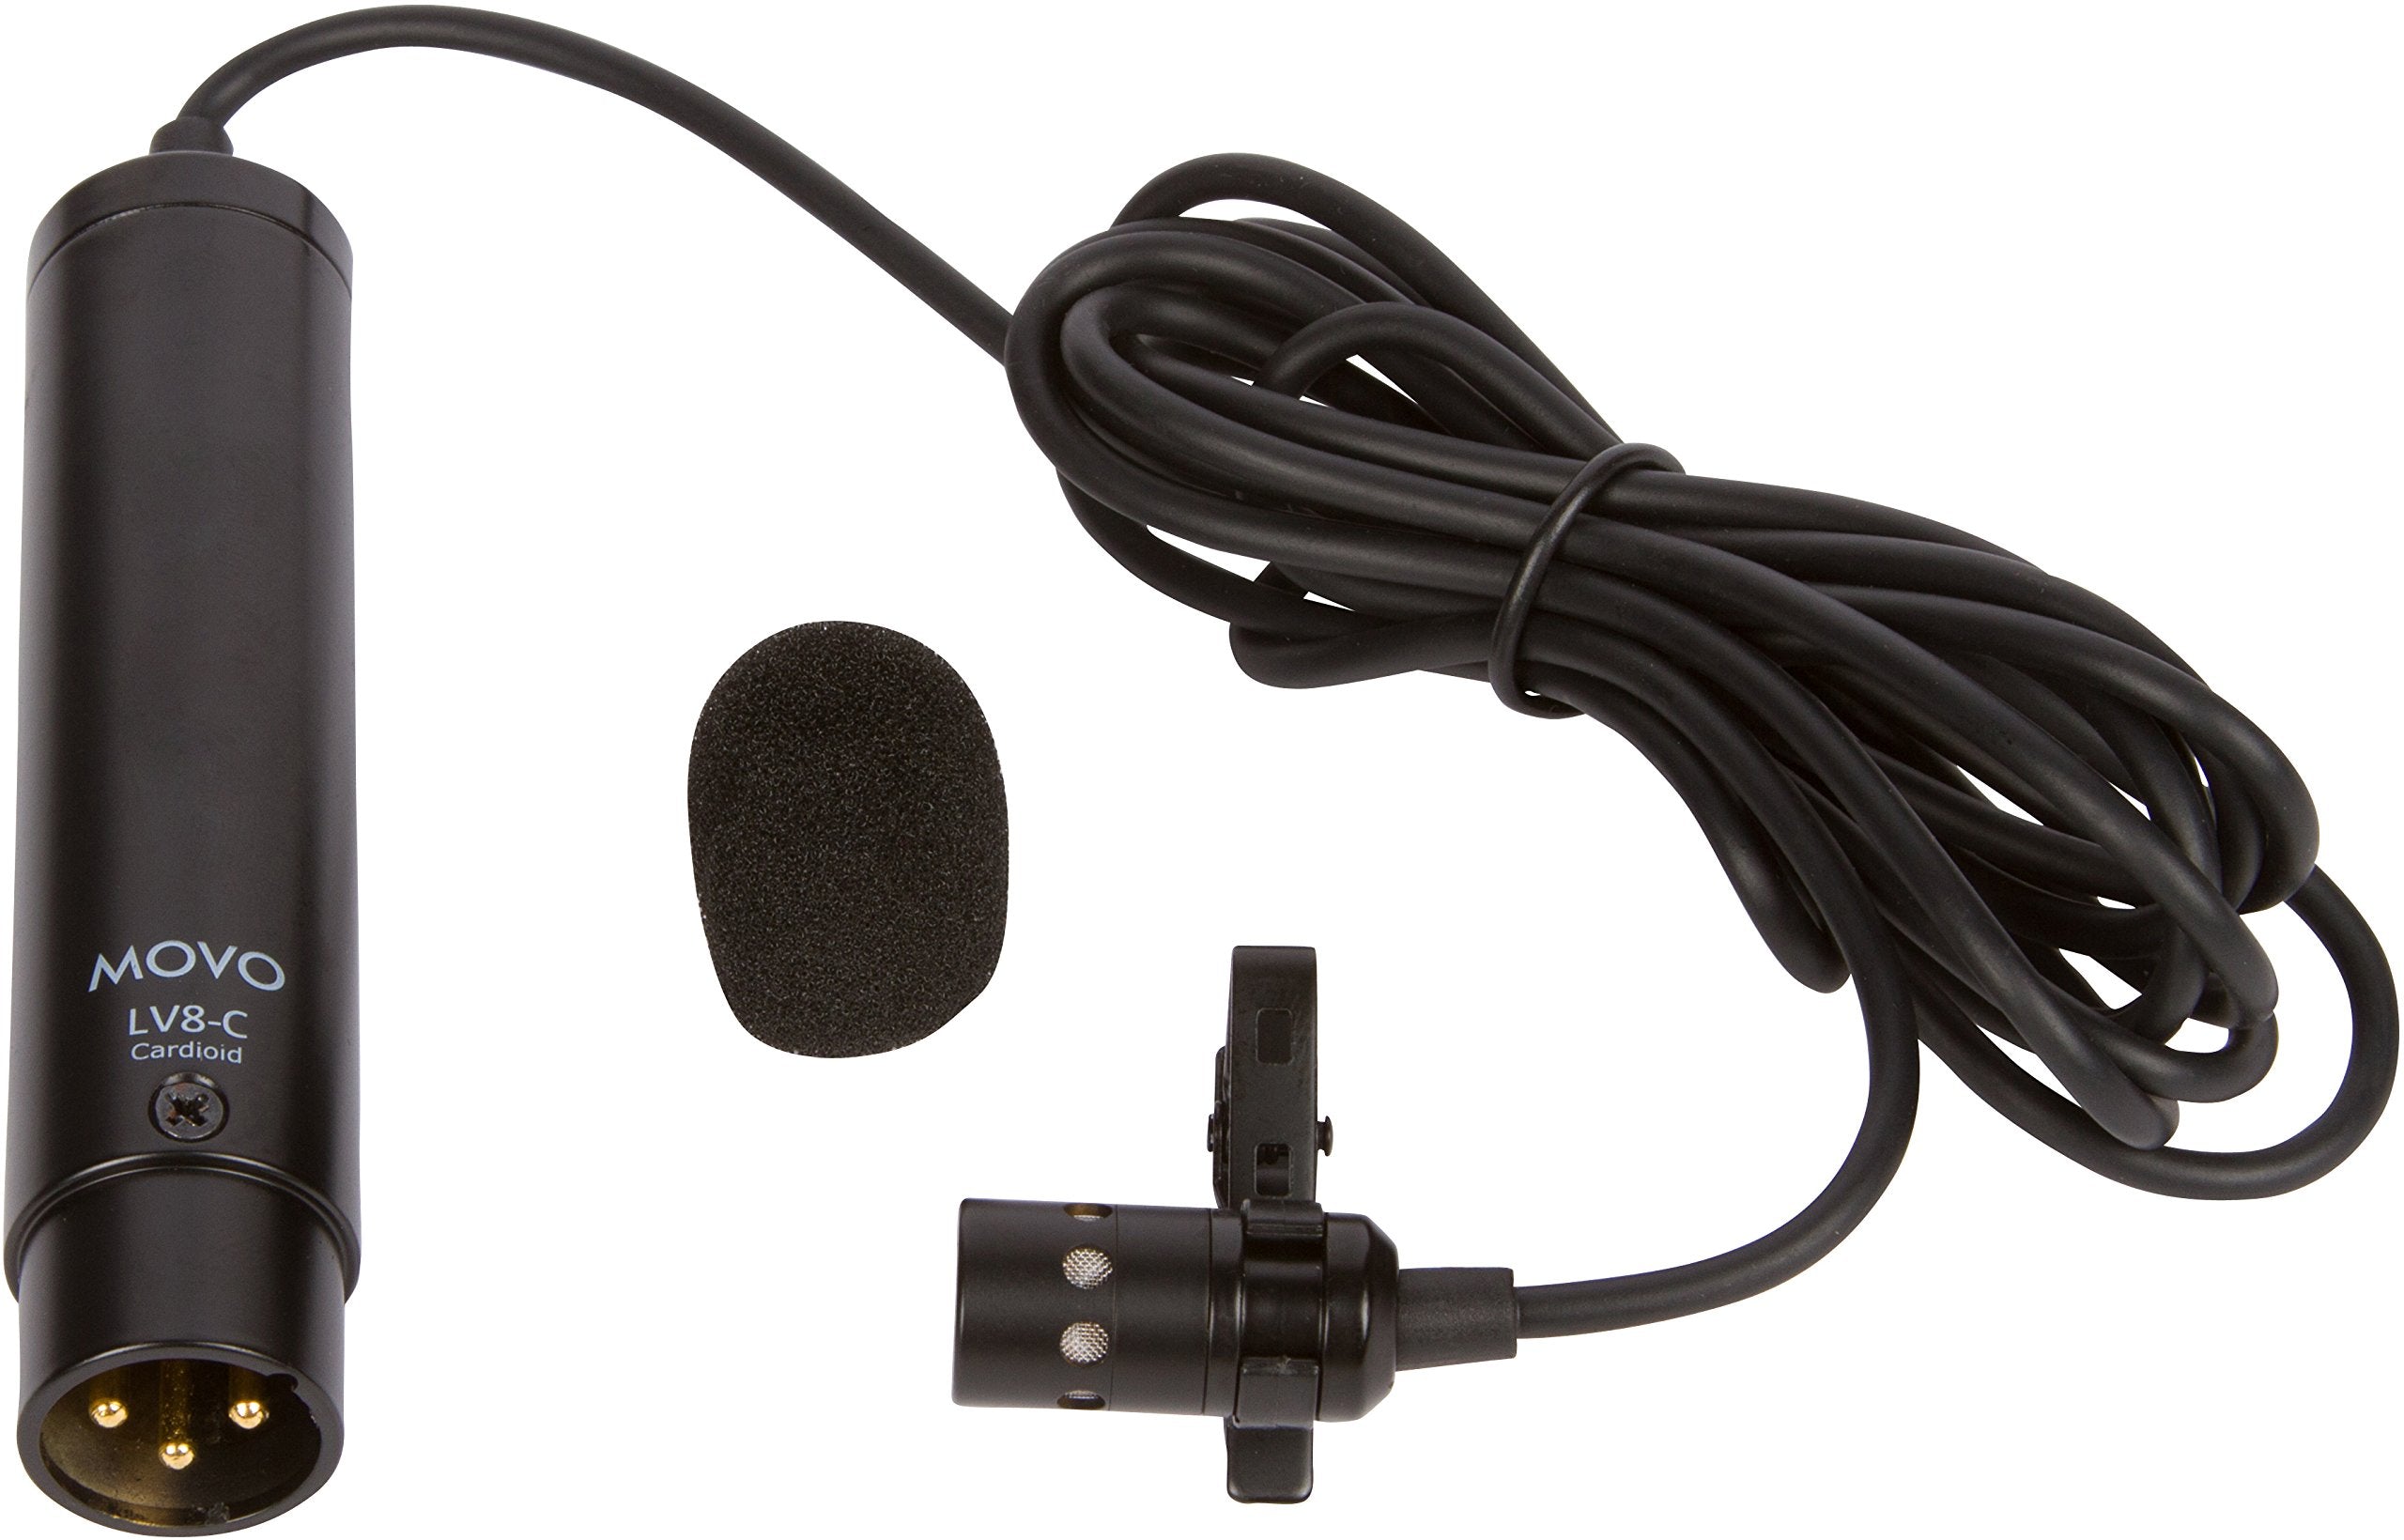 Movo LV8-C Broadcast-Quality XLR Lavalier Cardioid Condenser Wired Microphone with 12mm Mic Capsule for Accurate Voice Recording - Kit Includes Lapel Clip, Case and Windscreen  - Very Good